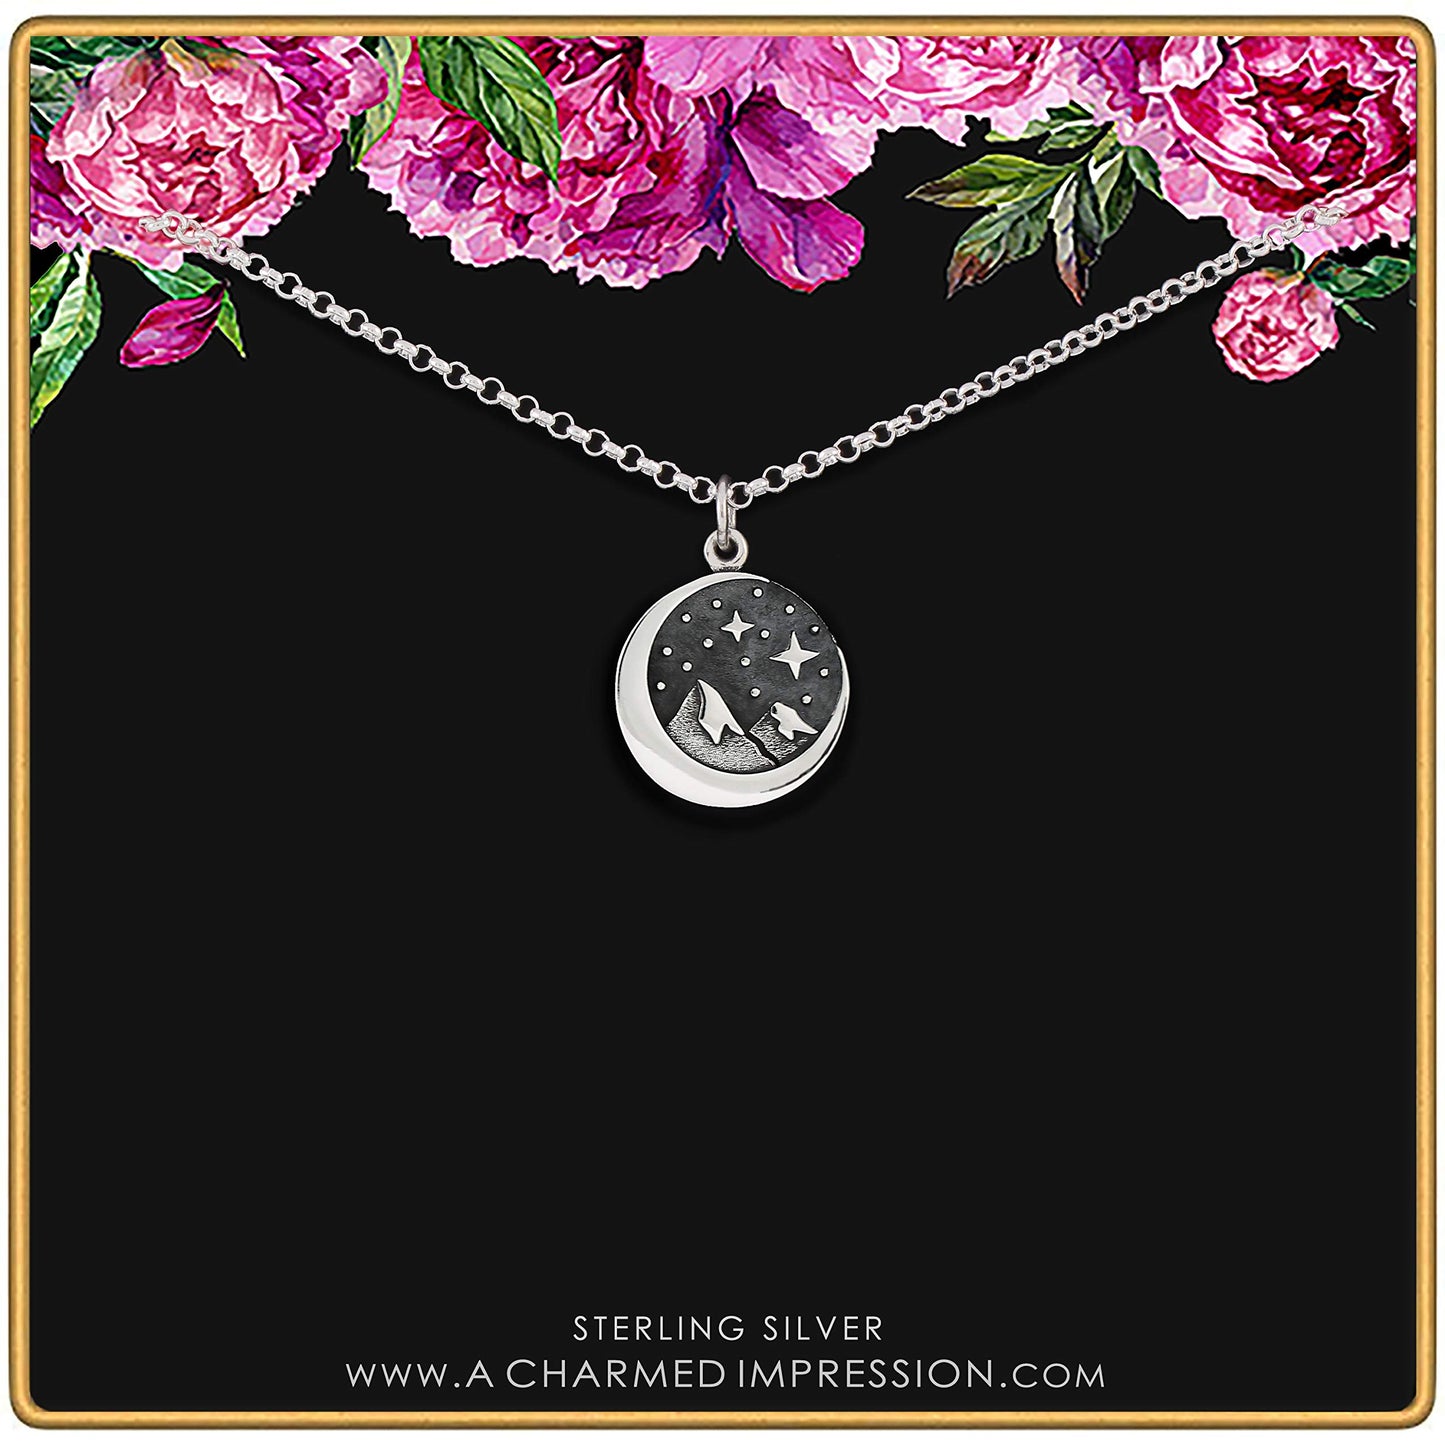 Sterling Silver Star Moon & Mountains Pendant Necklace • Starry Night Mountain Charm • Crescent Moon • Snow Capped Mountain Pendant Necklace • Hiking Camping Outdoor Nature Lover Gifts for Women